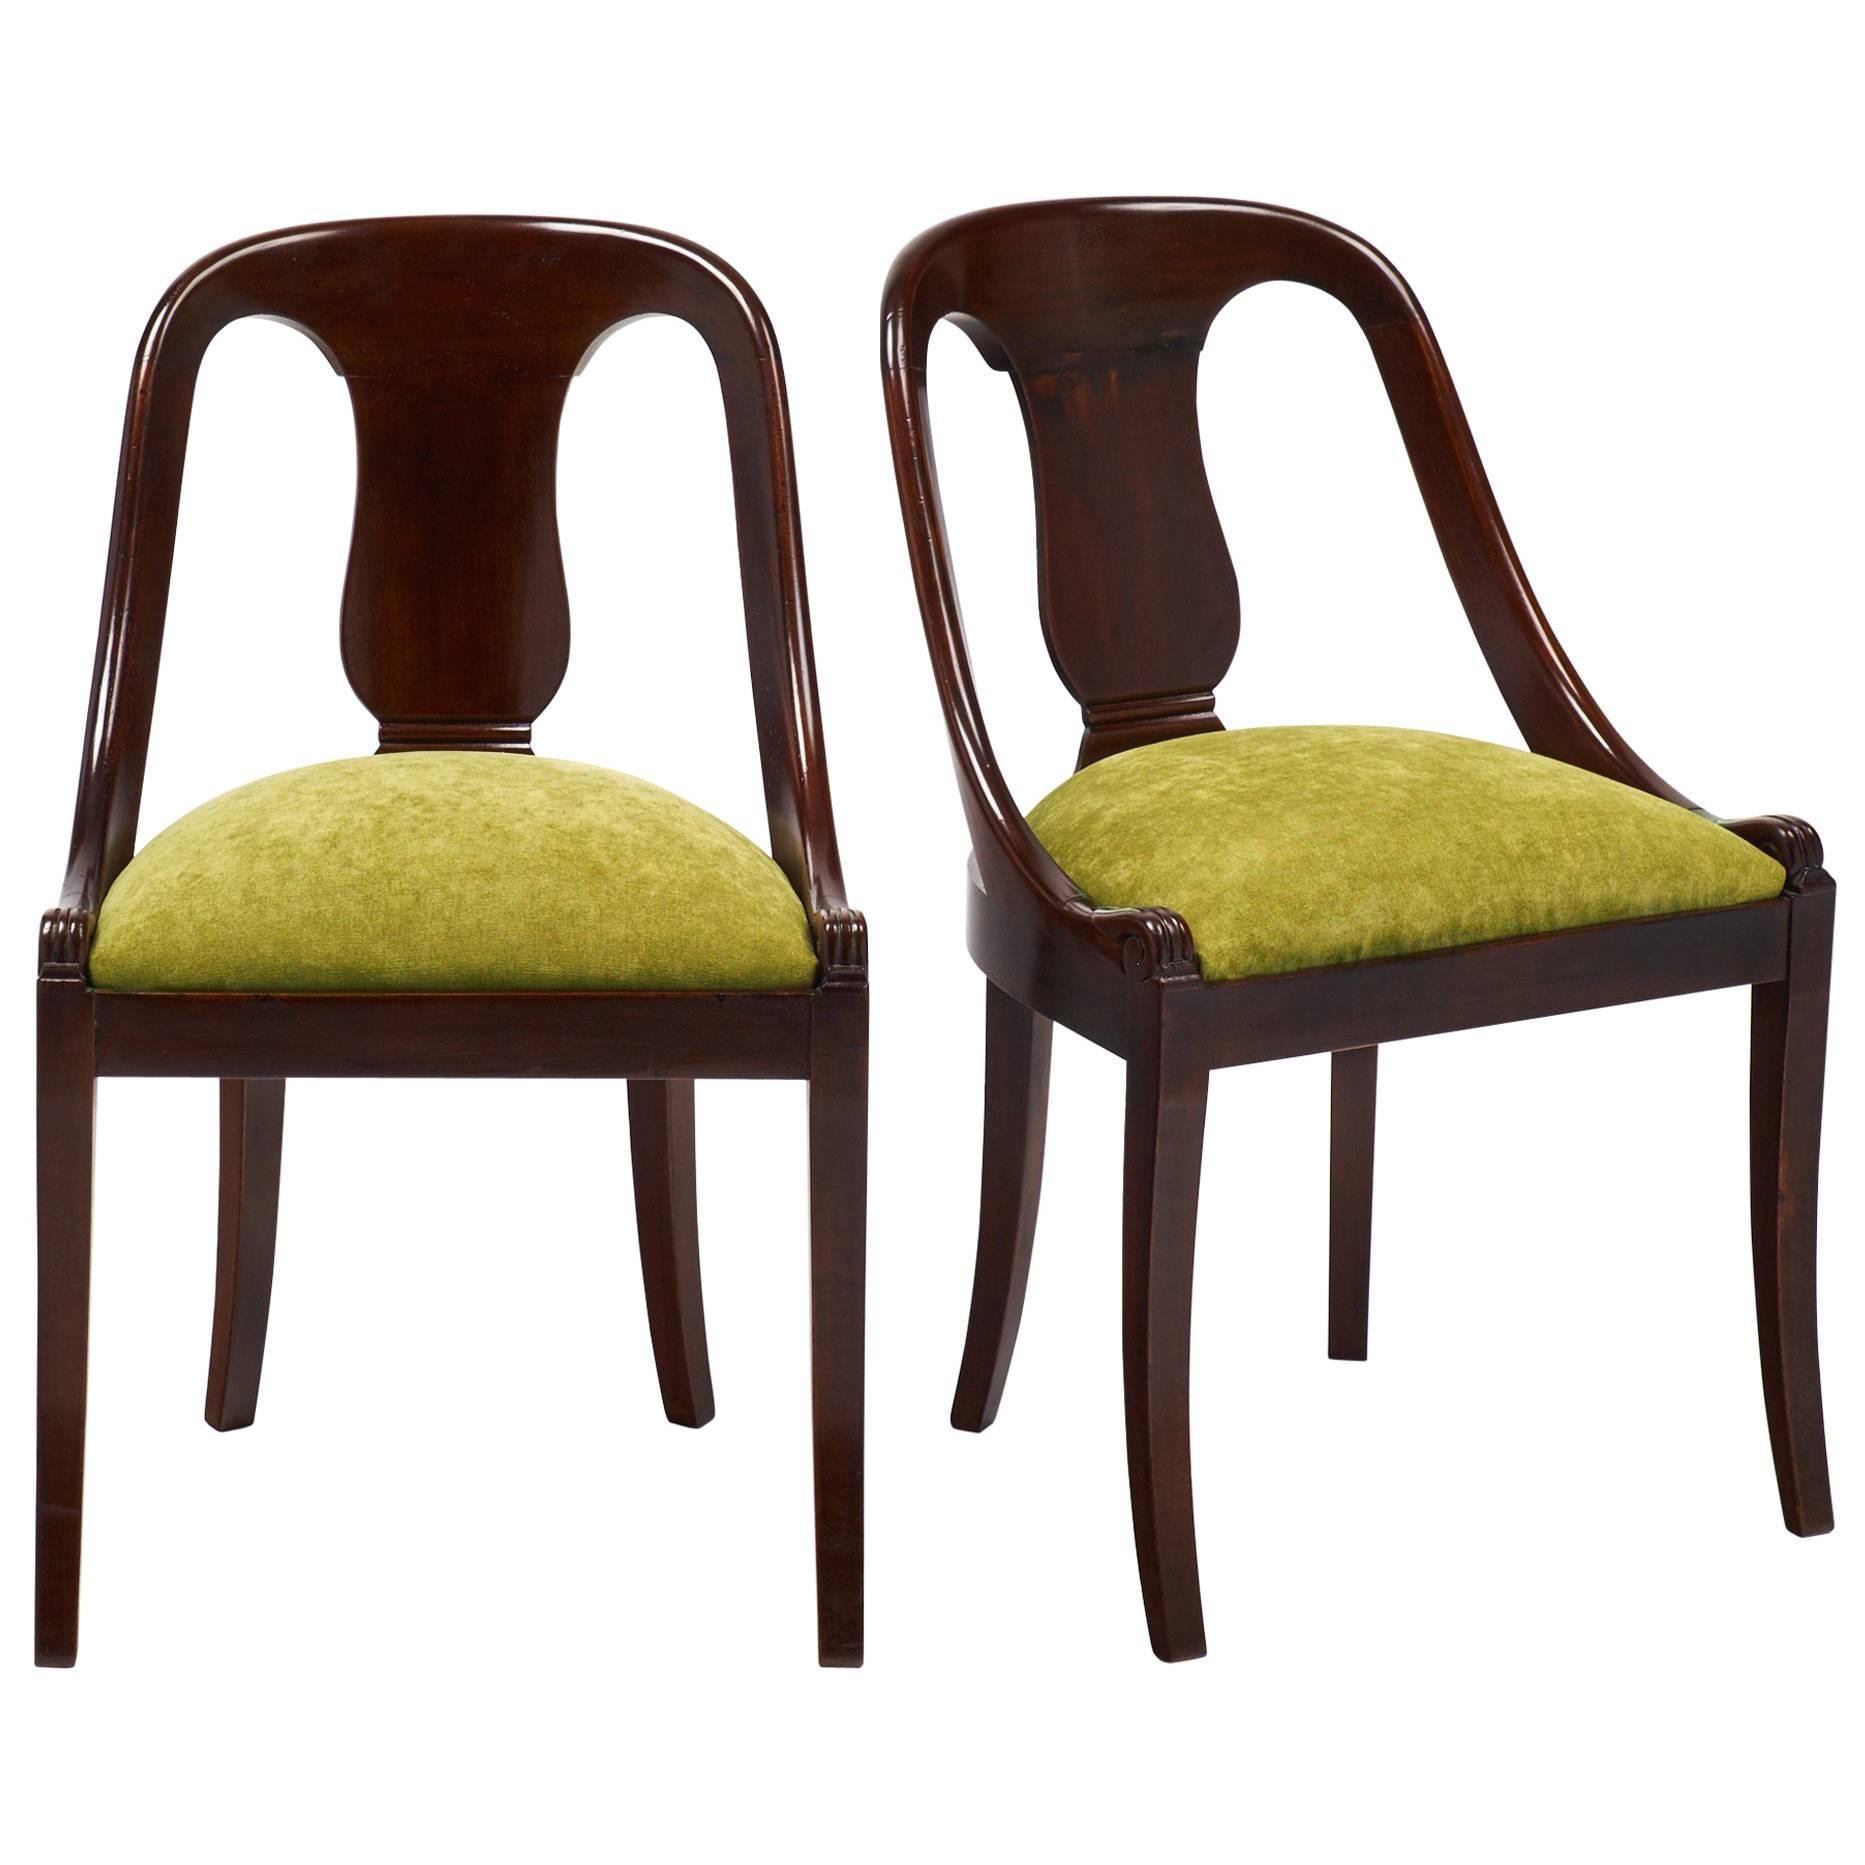 French Empire Style Pair of Solid Mahogany Gondola Chairs